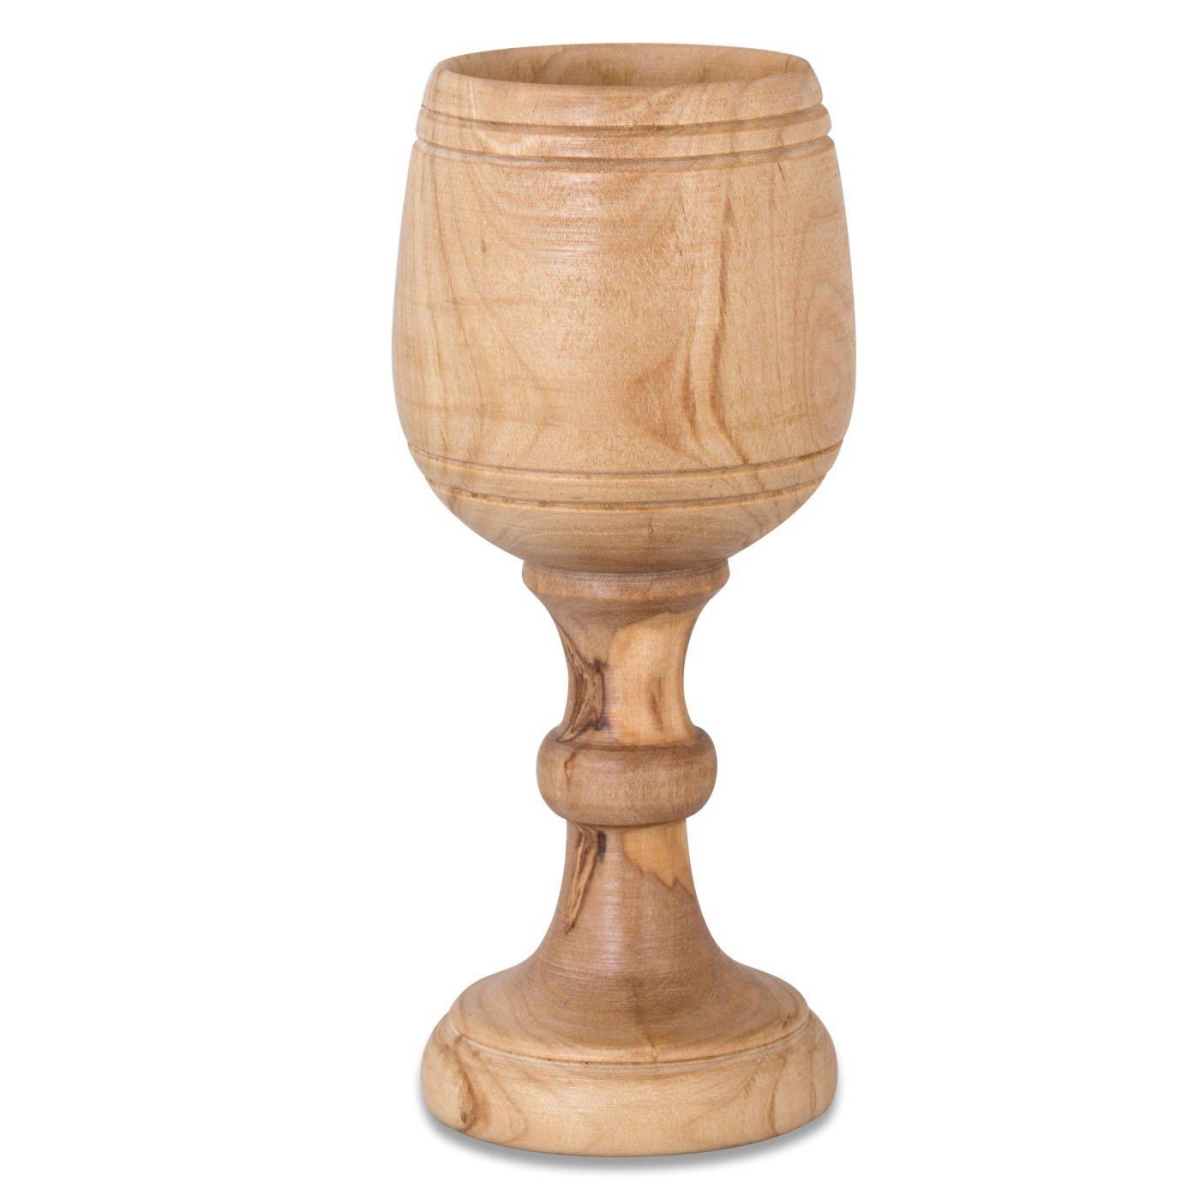 Olive Wood Hand-Carved Communion Cup - 1